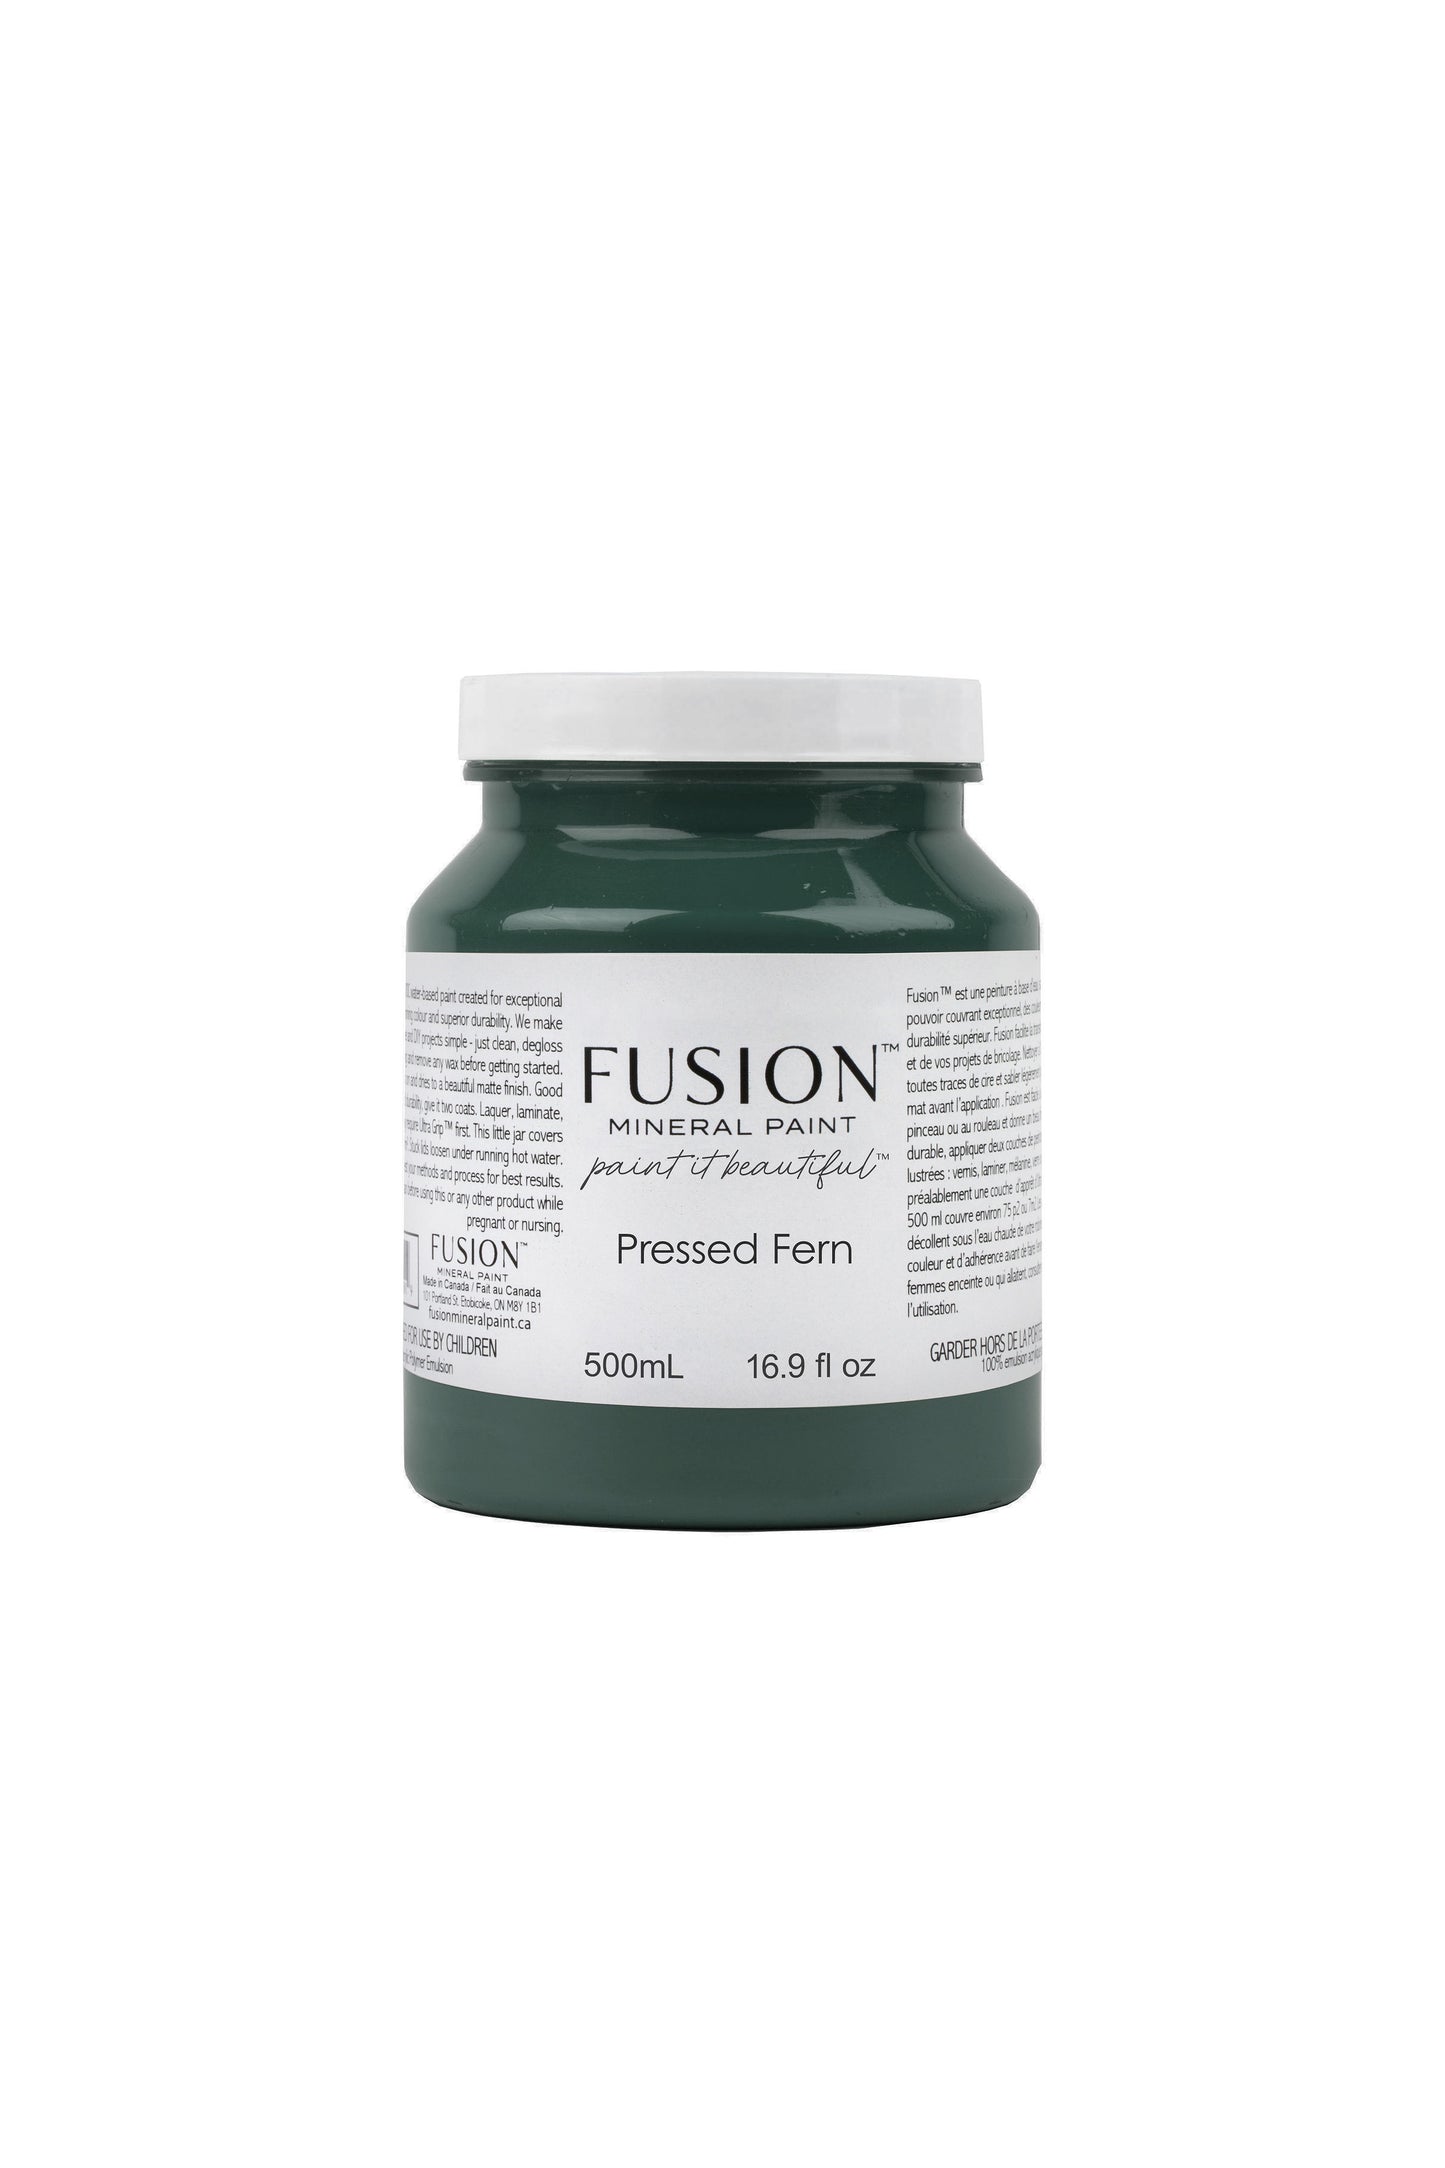 FUSION MINERAL PAINT- Pressed Fern